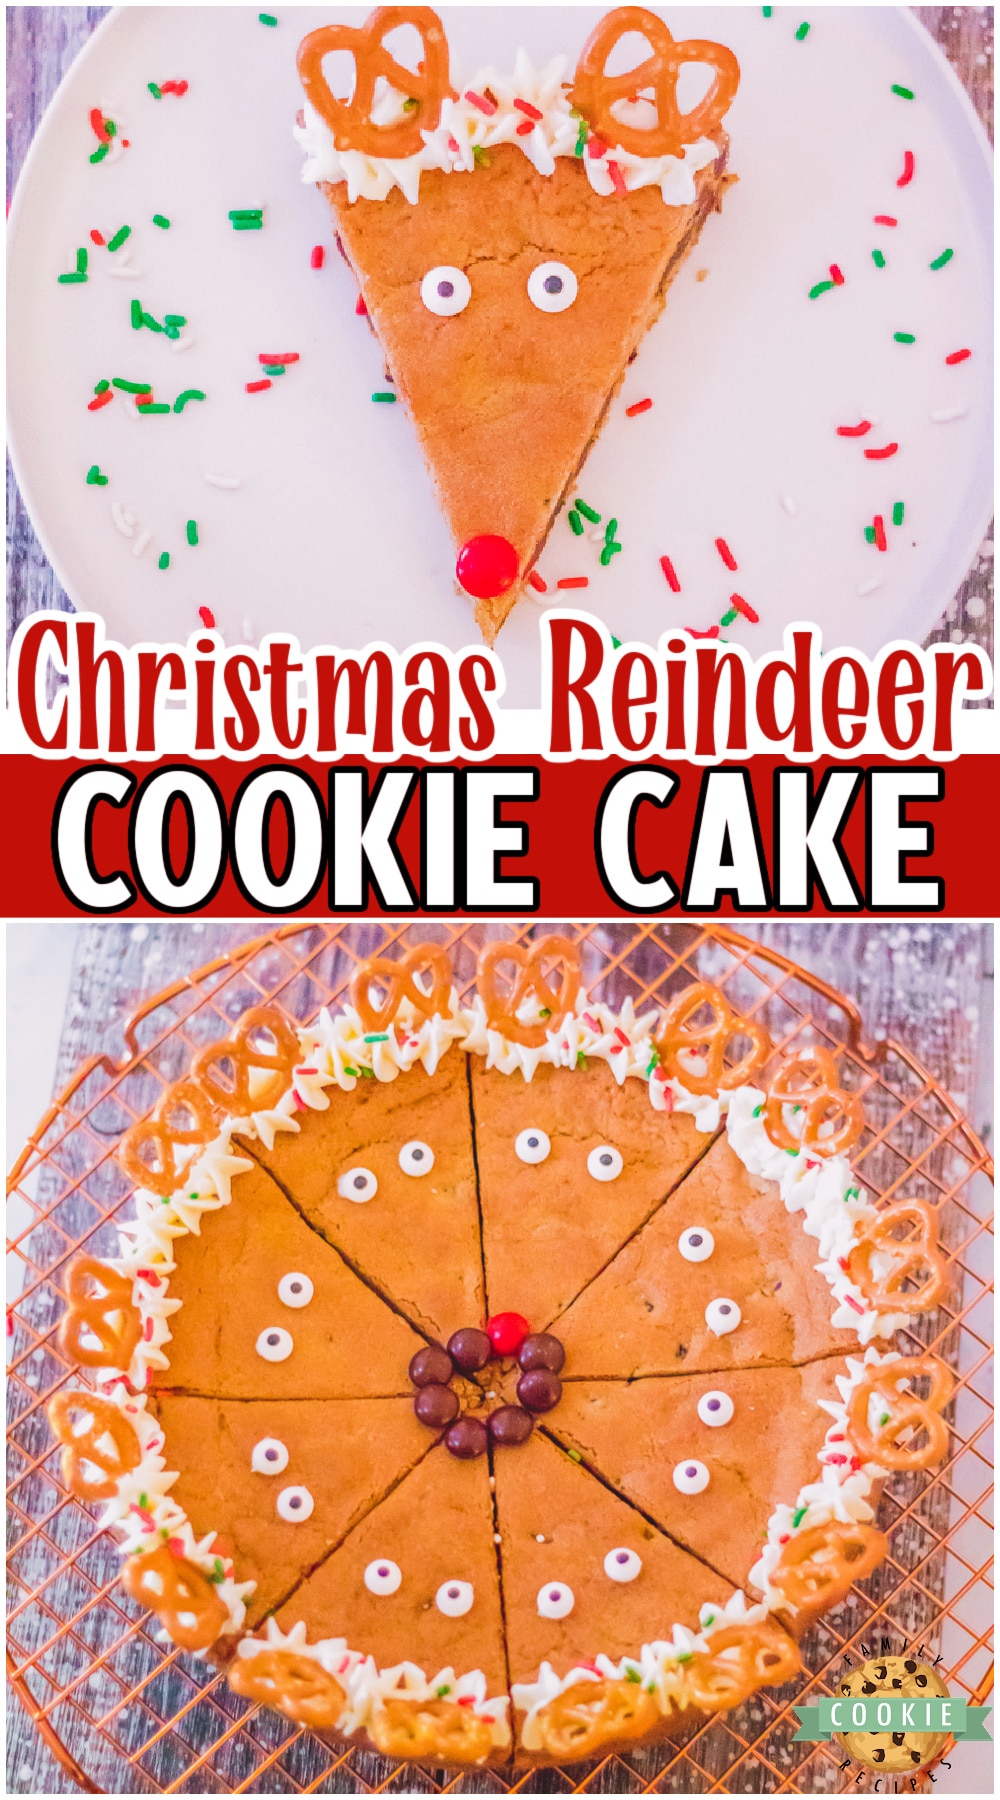 Christmas Reindeer Cookie Cake made with chocolate chip cookie dough & topped with simple candy to look like reindeer! Easy, festive holiday cookie cake that's Rudolph approved! 